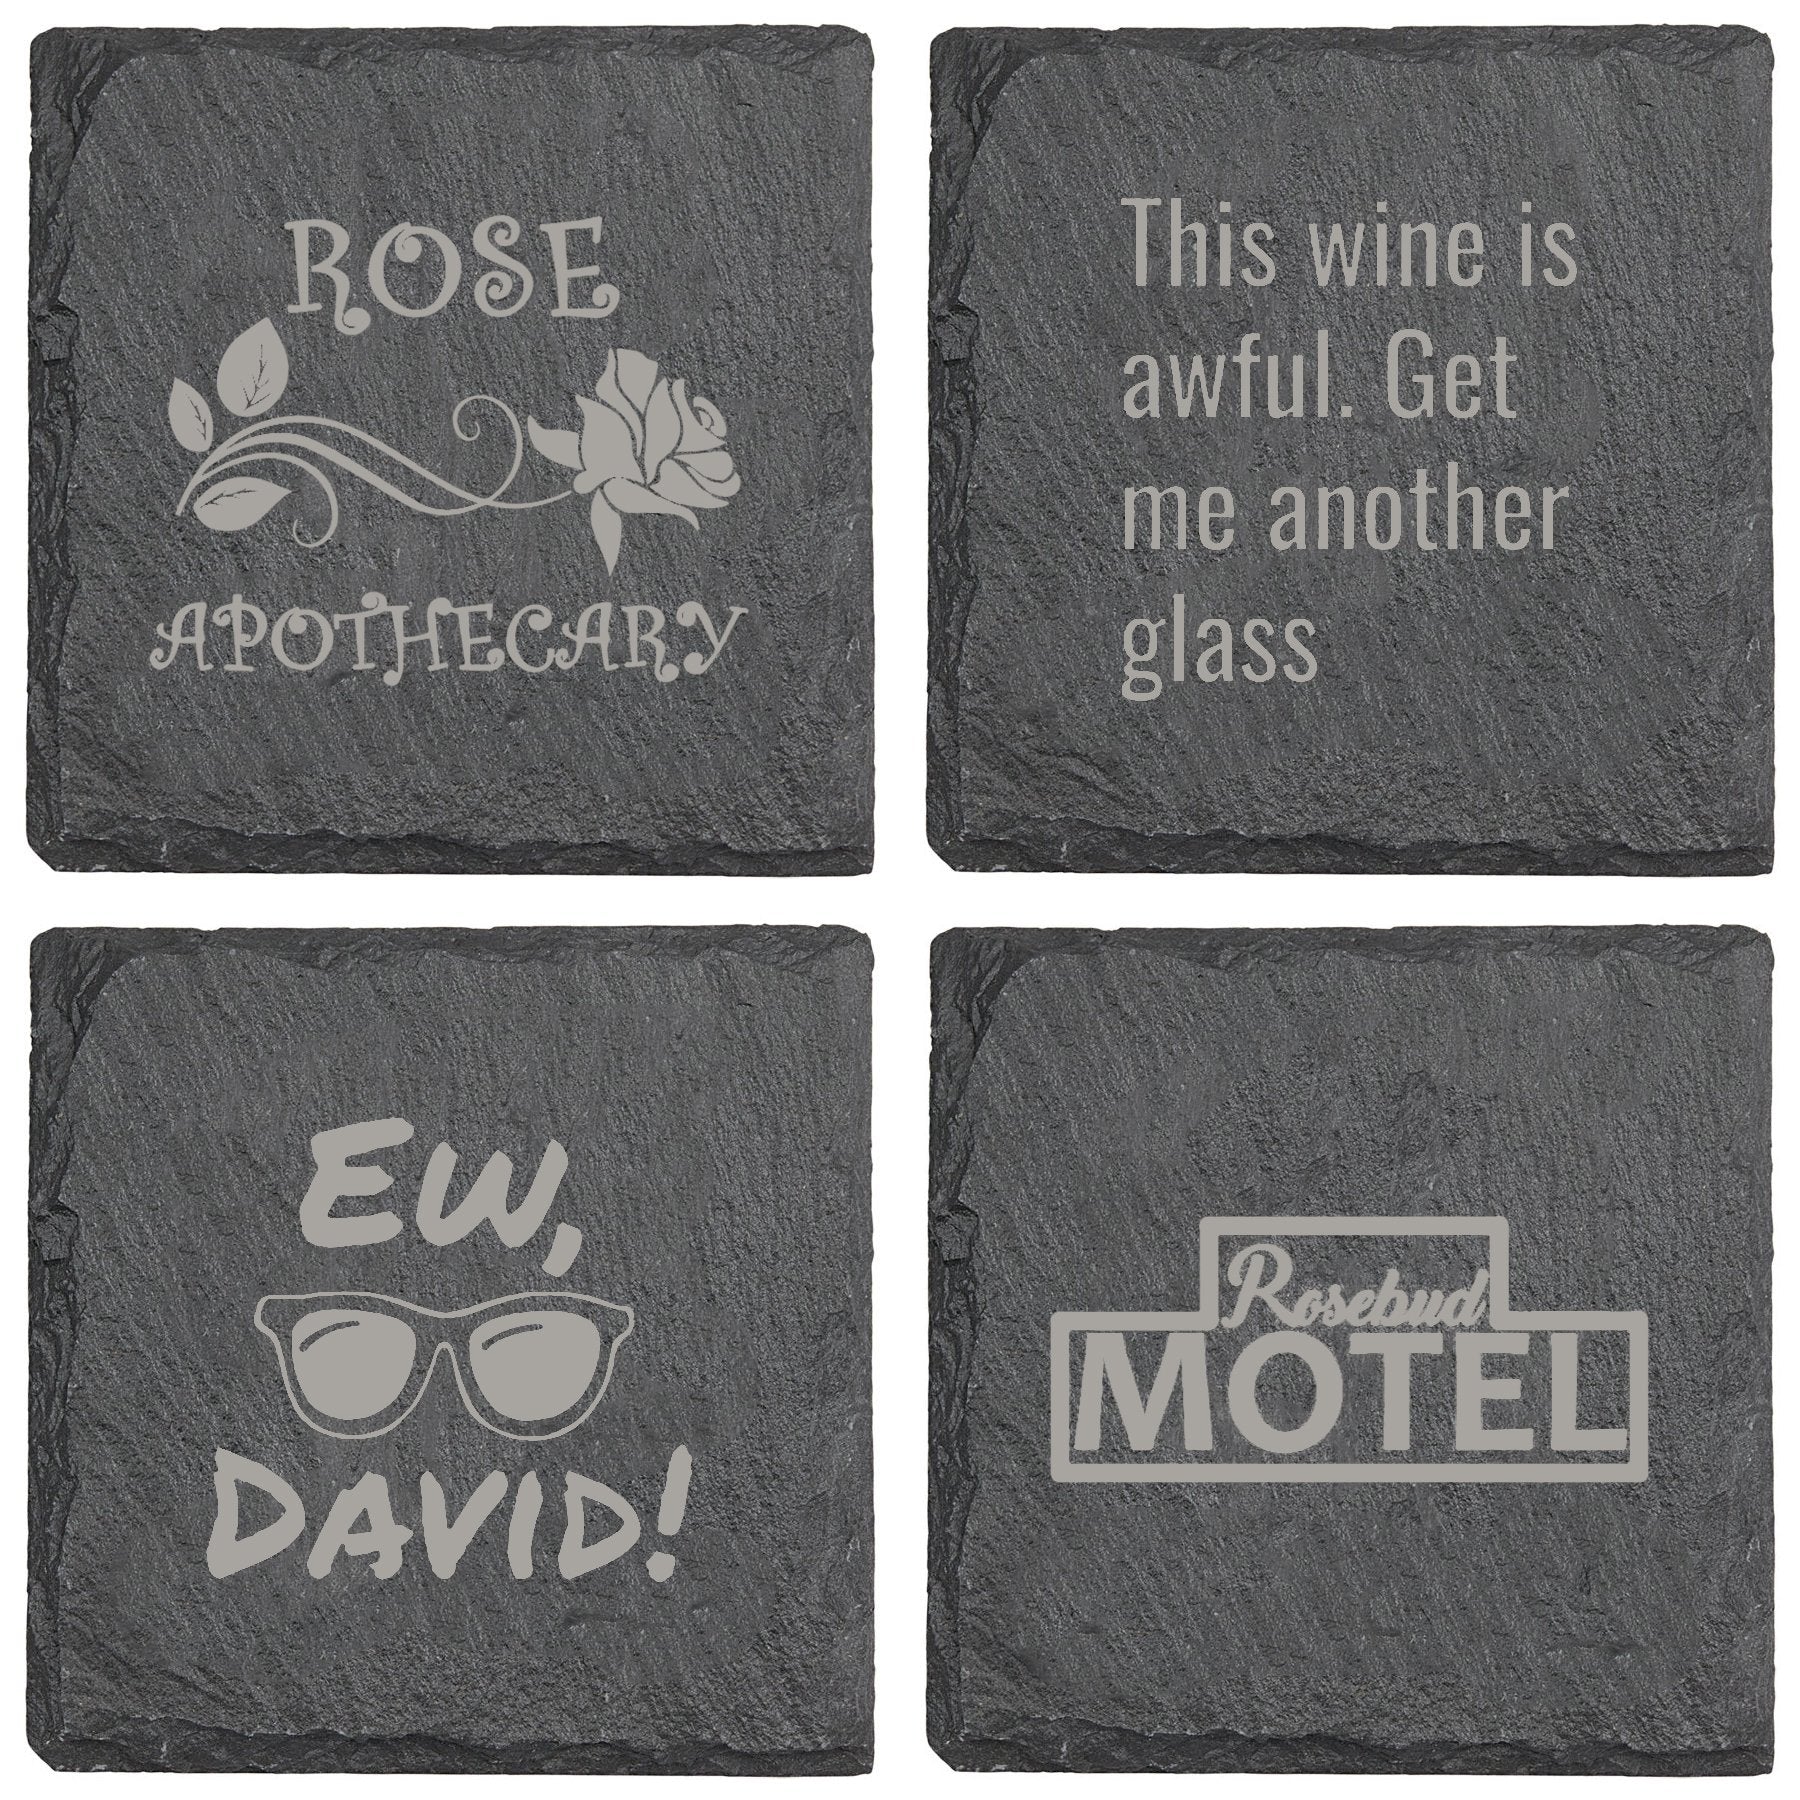 Schitts Creek Rose Apothecary Slate Coaster